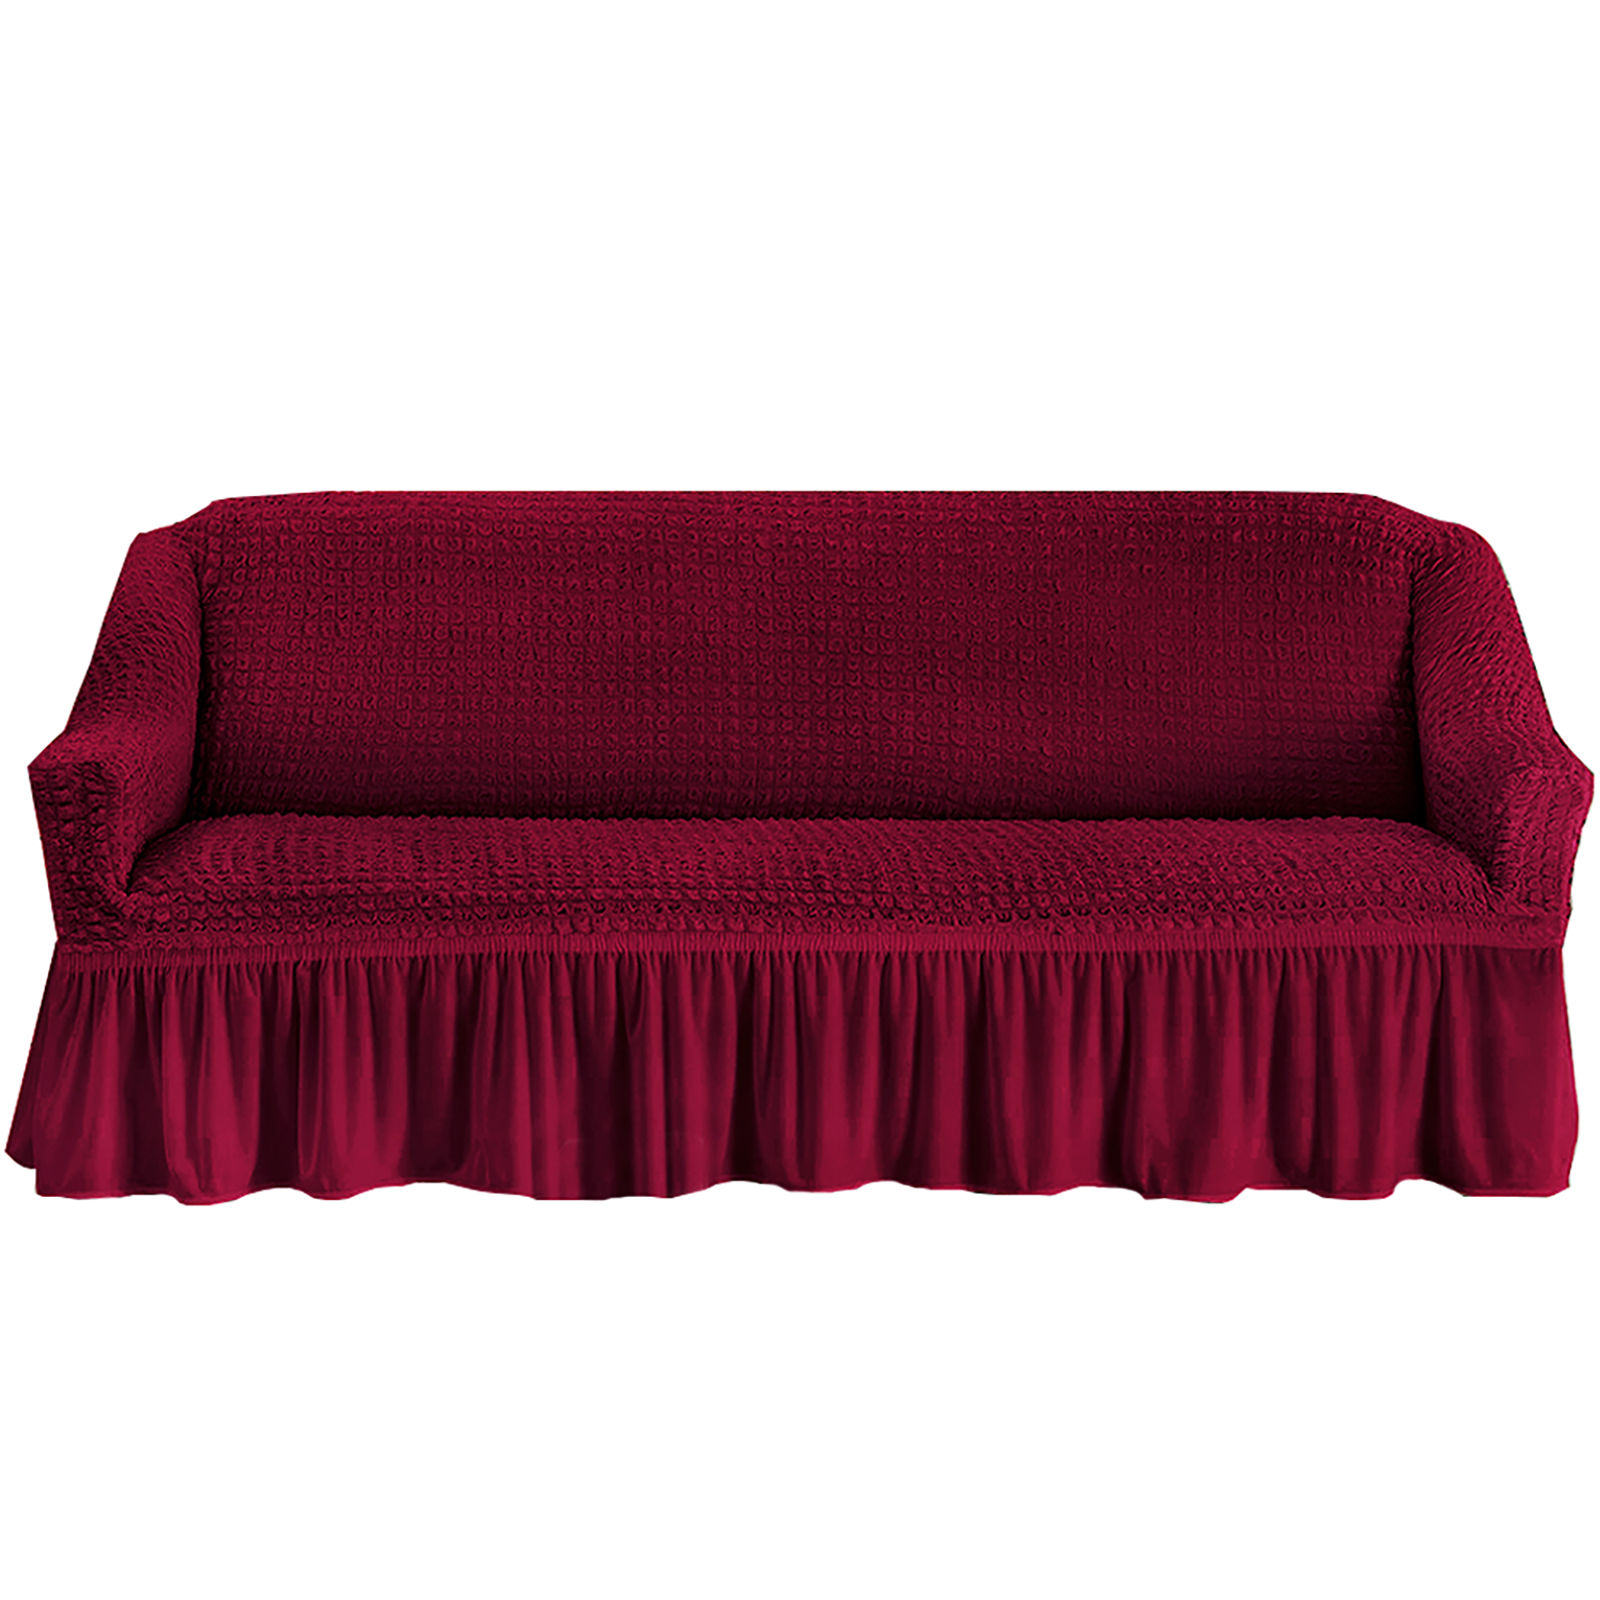 Stretch Sofa Slipcover, 3 Seater Sofa Slipcovers With Skirt With Armless Soft Sofa Cover Elastic Straps Sofa Slipcover For Living Room Kids Pets-red-Small